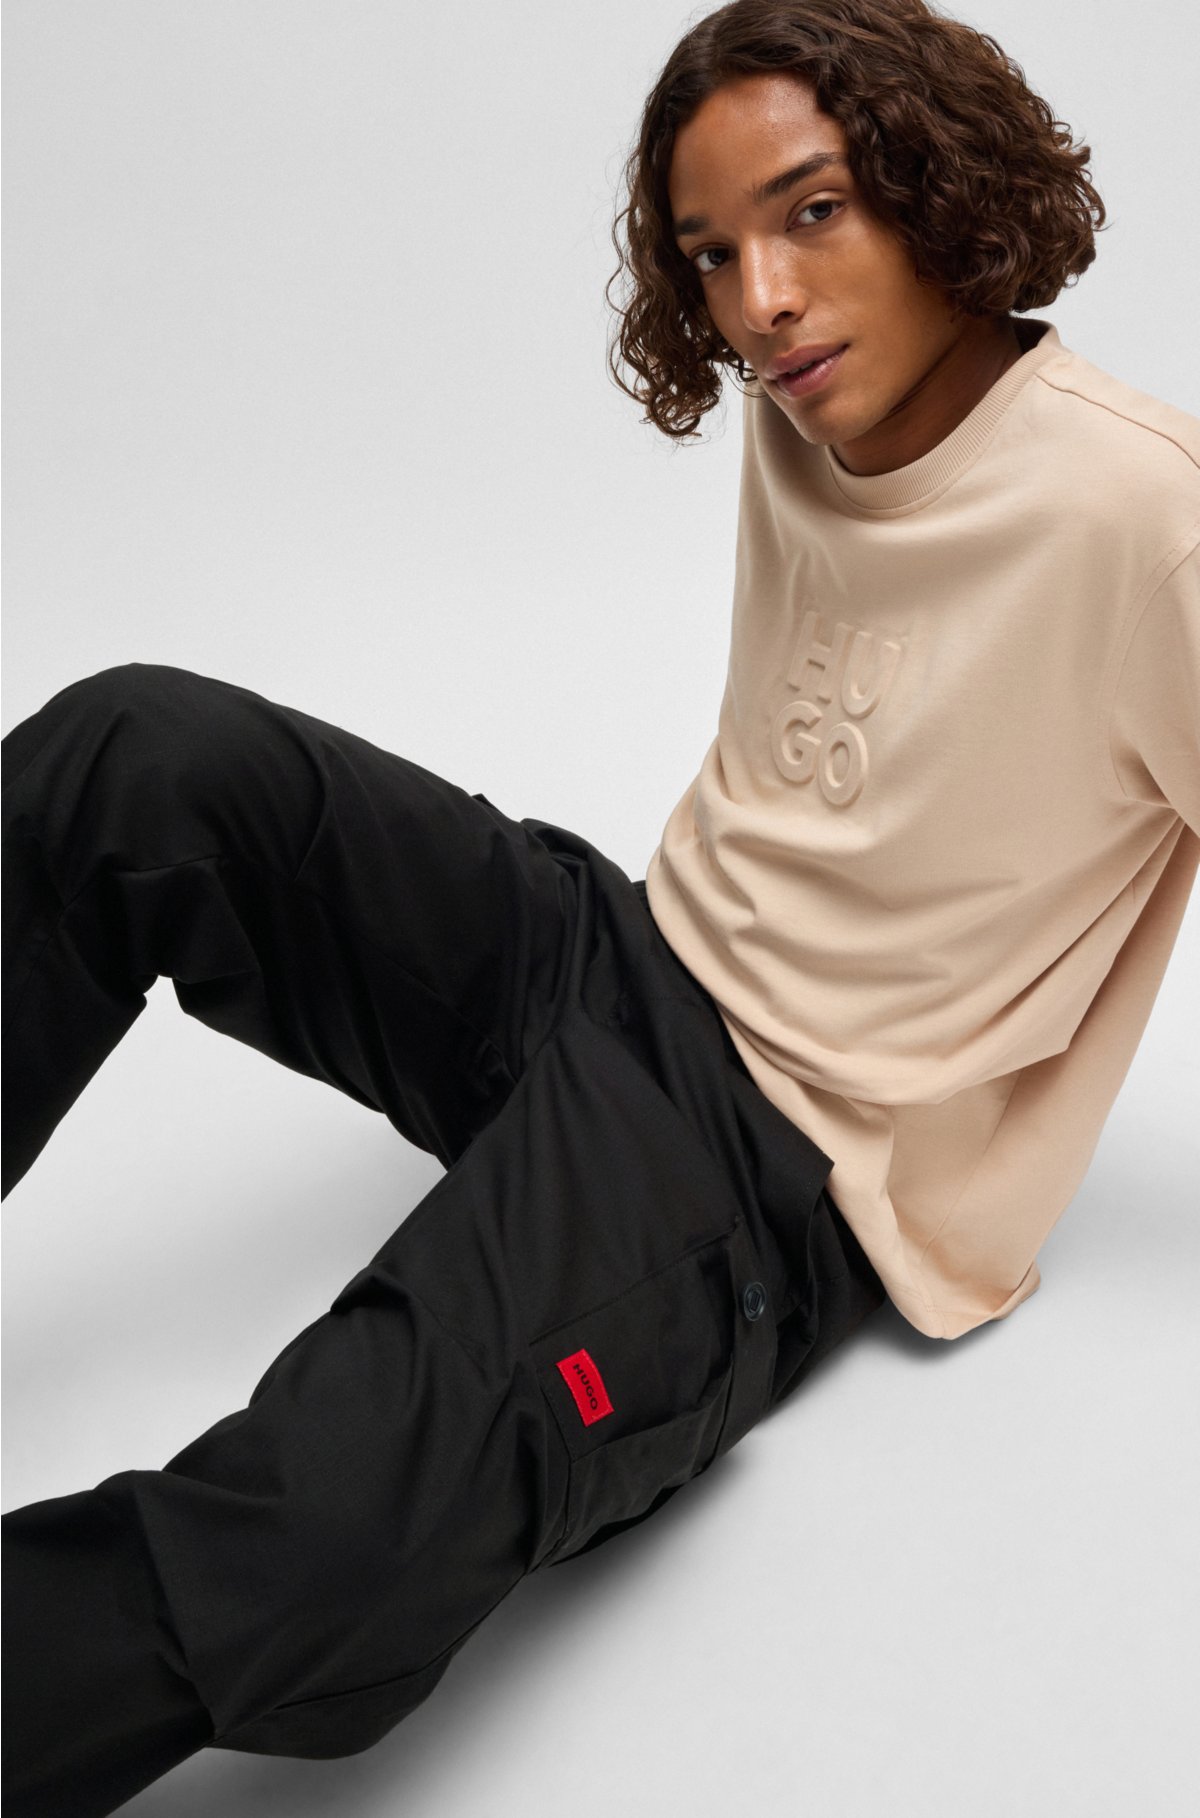 HUGO - Regular-fit cargo trousers in ripstop cotton